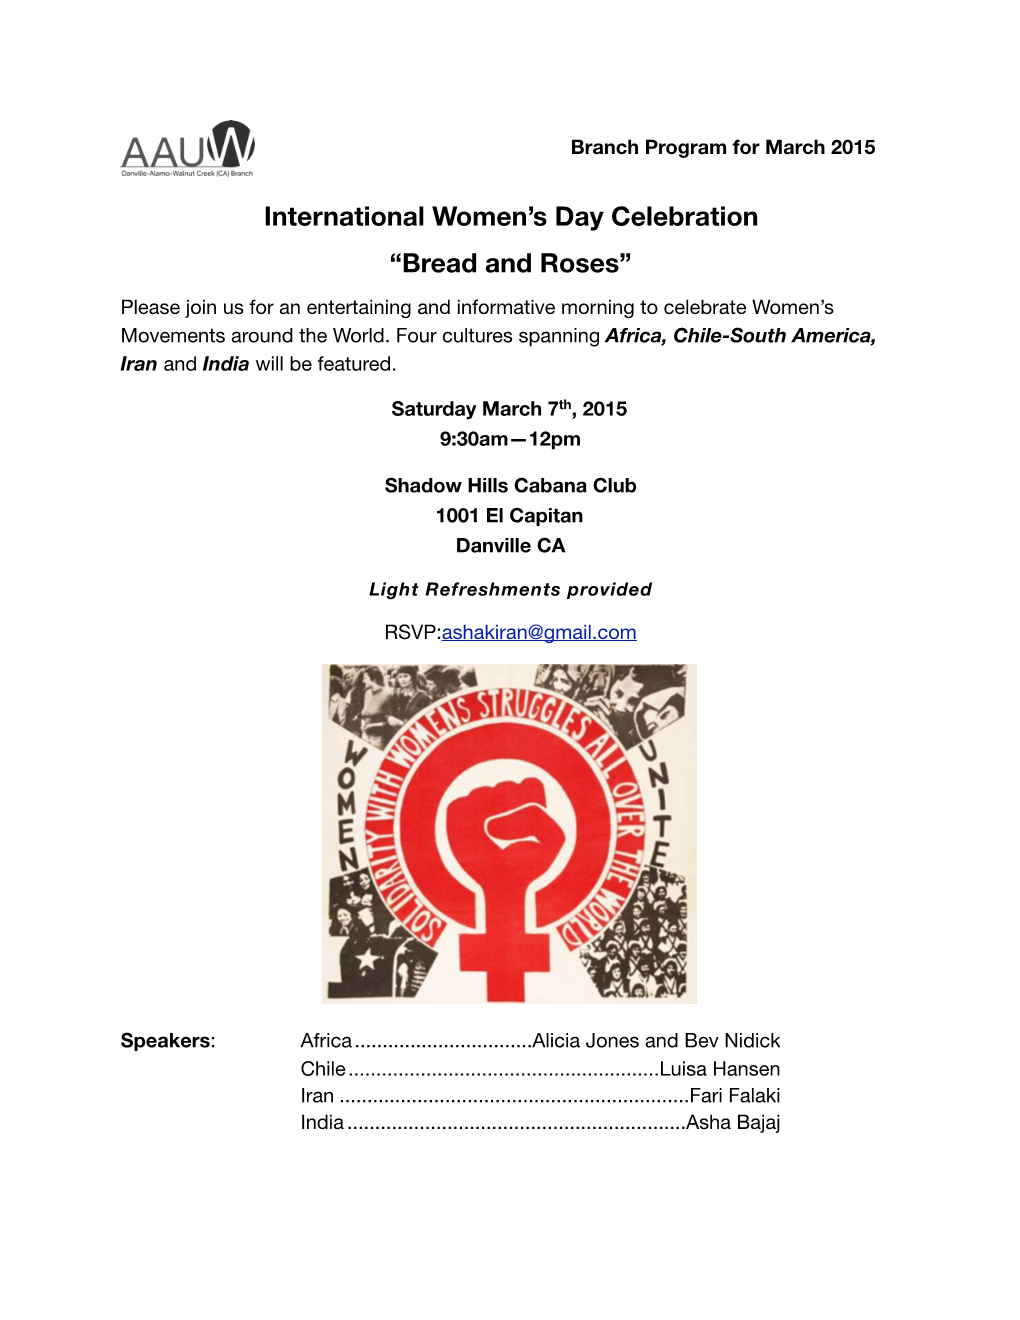 International Women's Day Celebration “Bread and Roses”